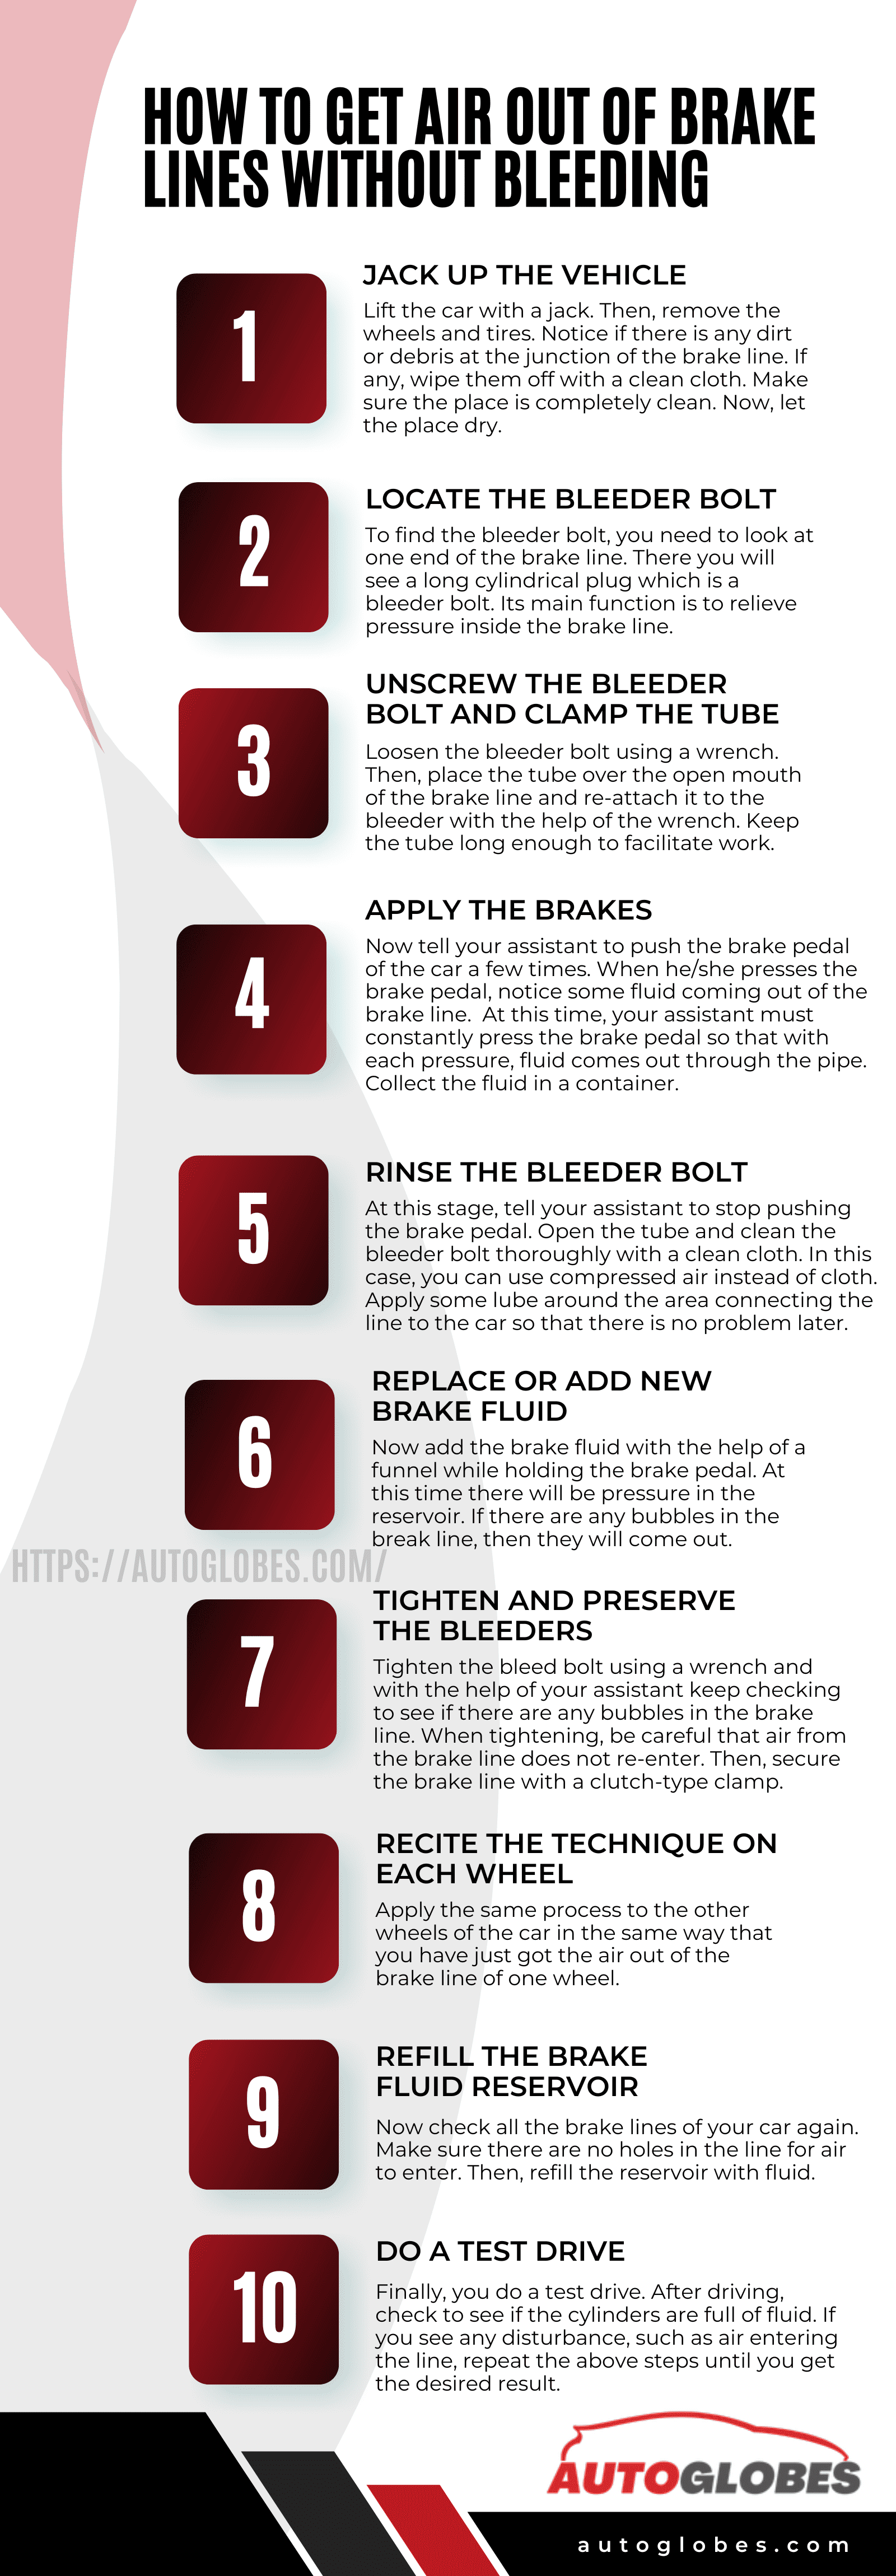 How to Get Air Out of Brake Lines Without Bleeding Infographic